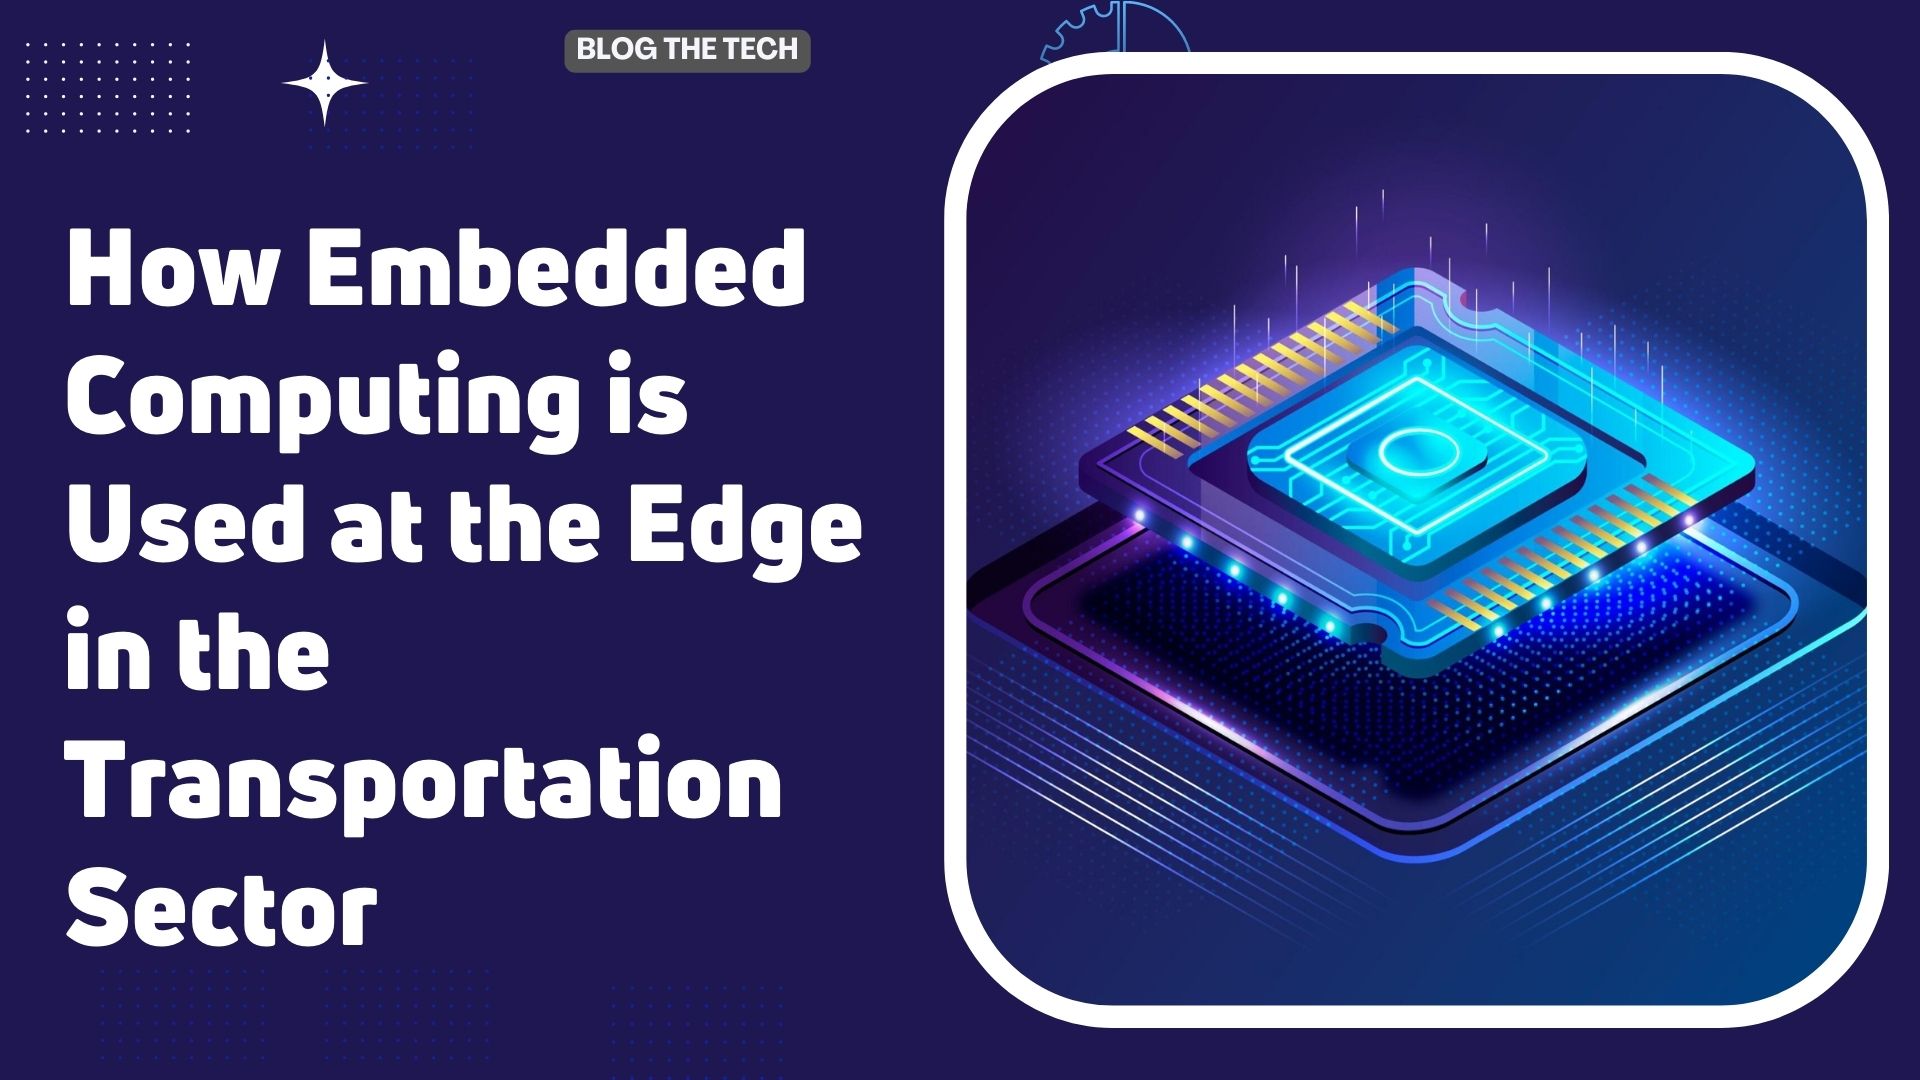 How Embedded Computing is Used at the Edge in the Transportation Sector